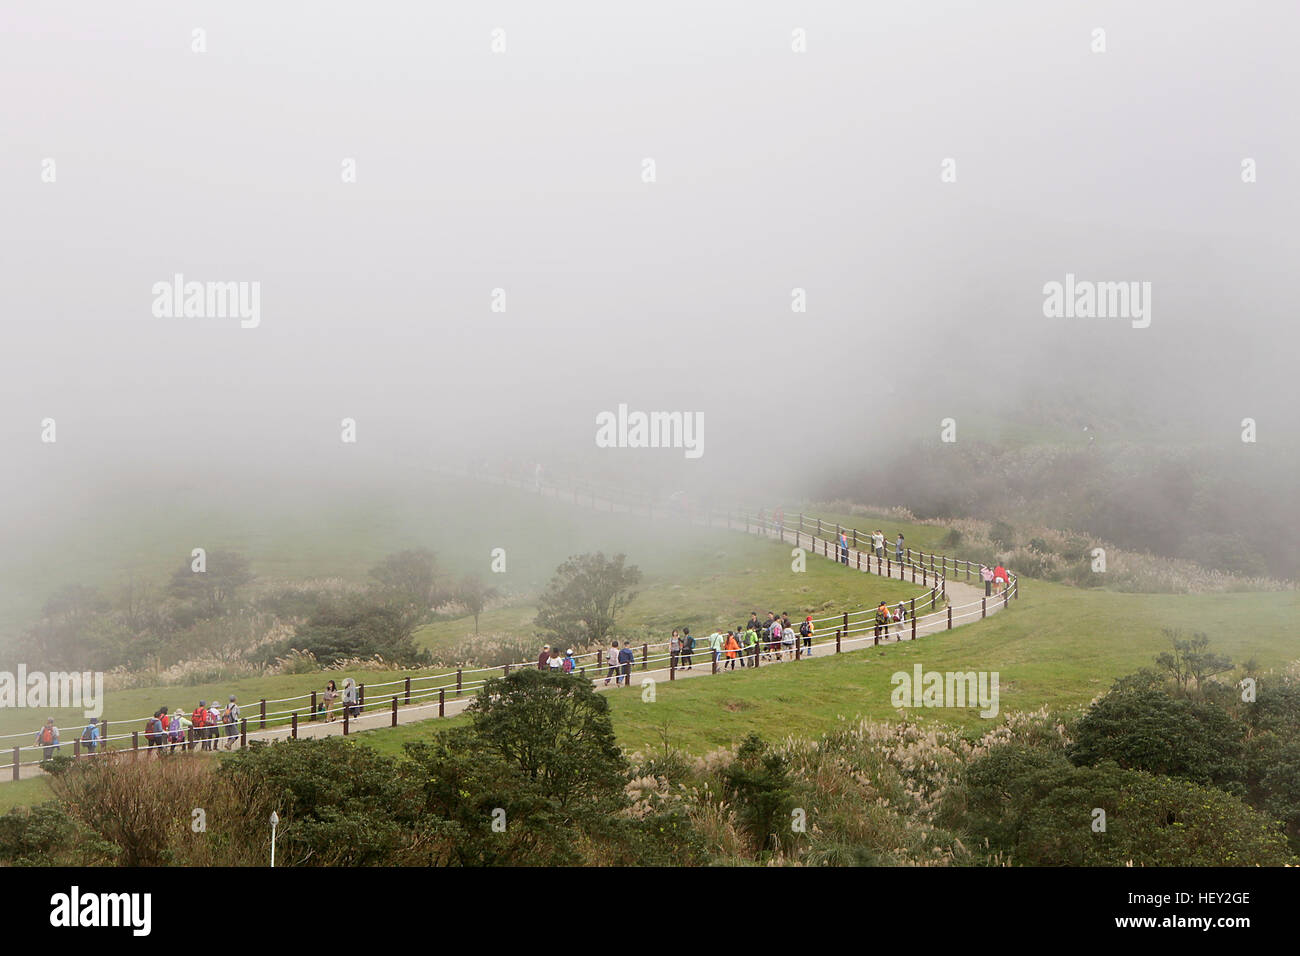 Long walking path leading all the way up the mountain obscured by heavy mist. Stock Photo